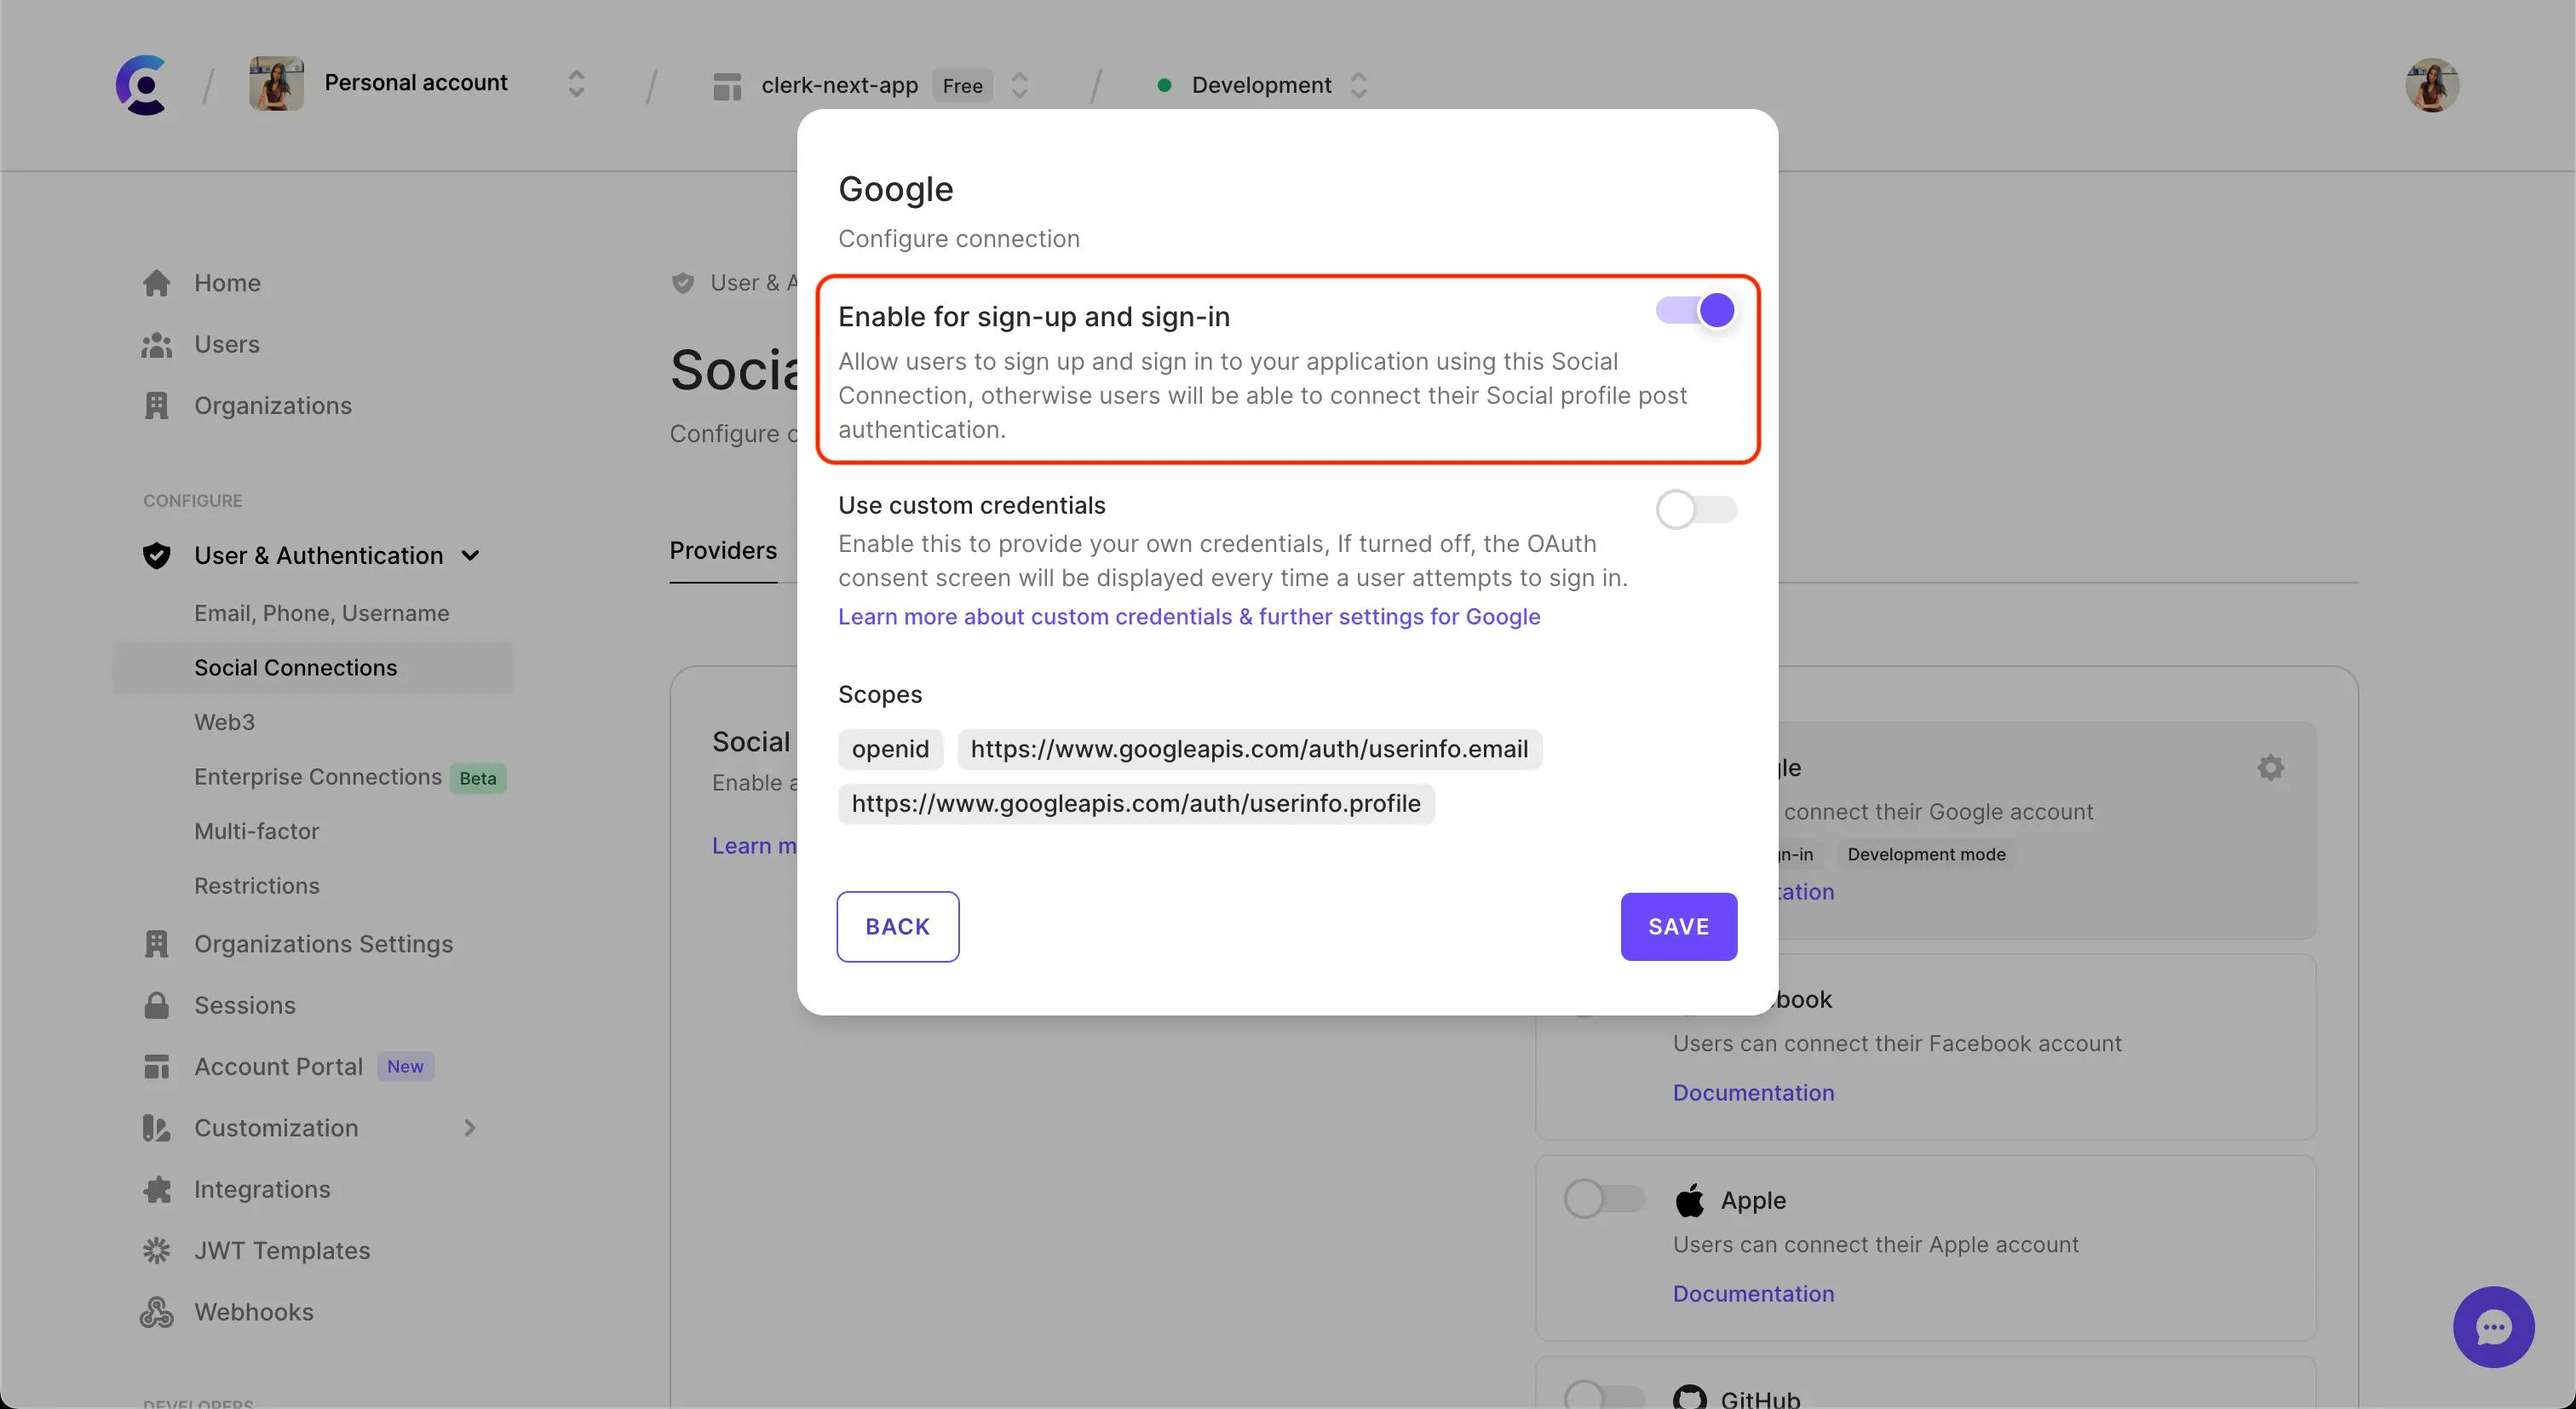 The 'Google' social connection settings modal with a red box surrounding the 'Enable for sign-up and sign-in' section.